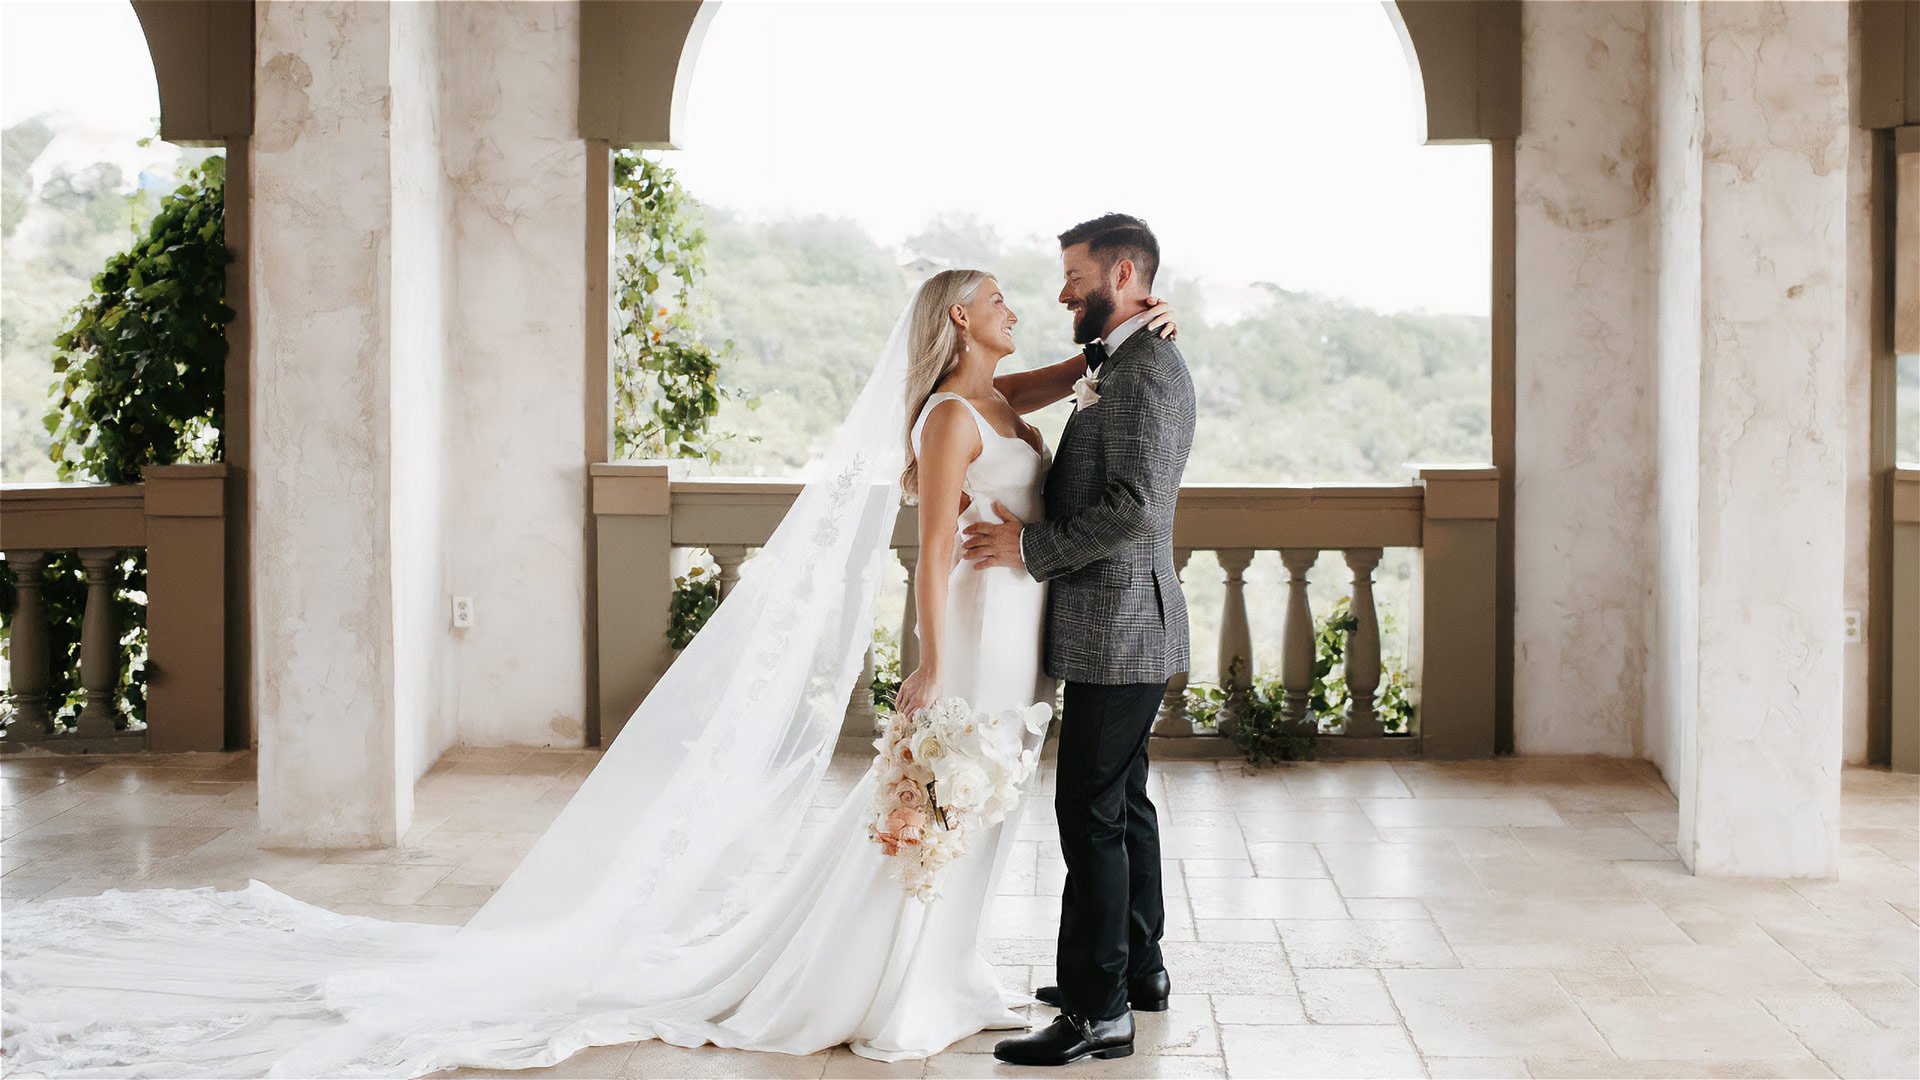 The 10 best wedding videographers we've seen while loaded wedding videos onto The Motion Books.